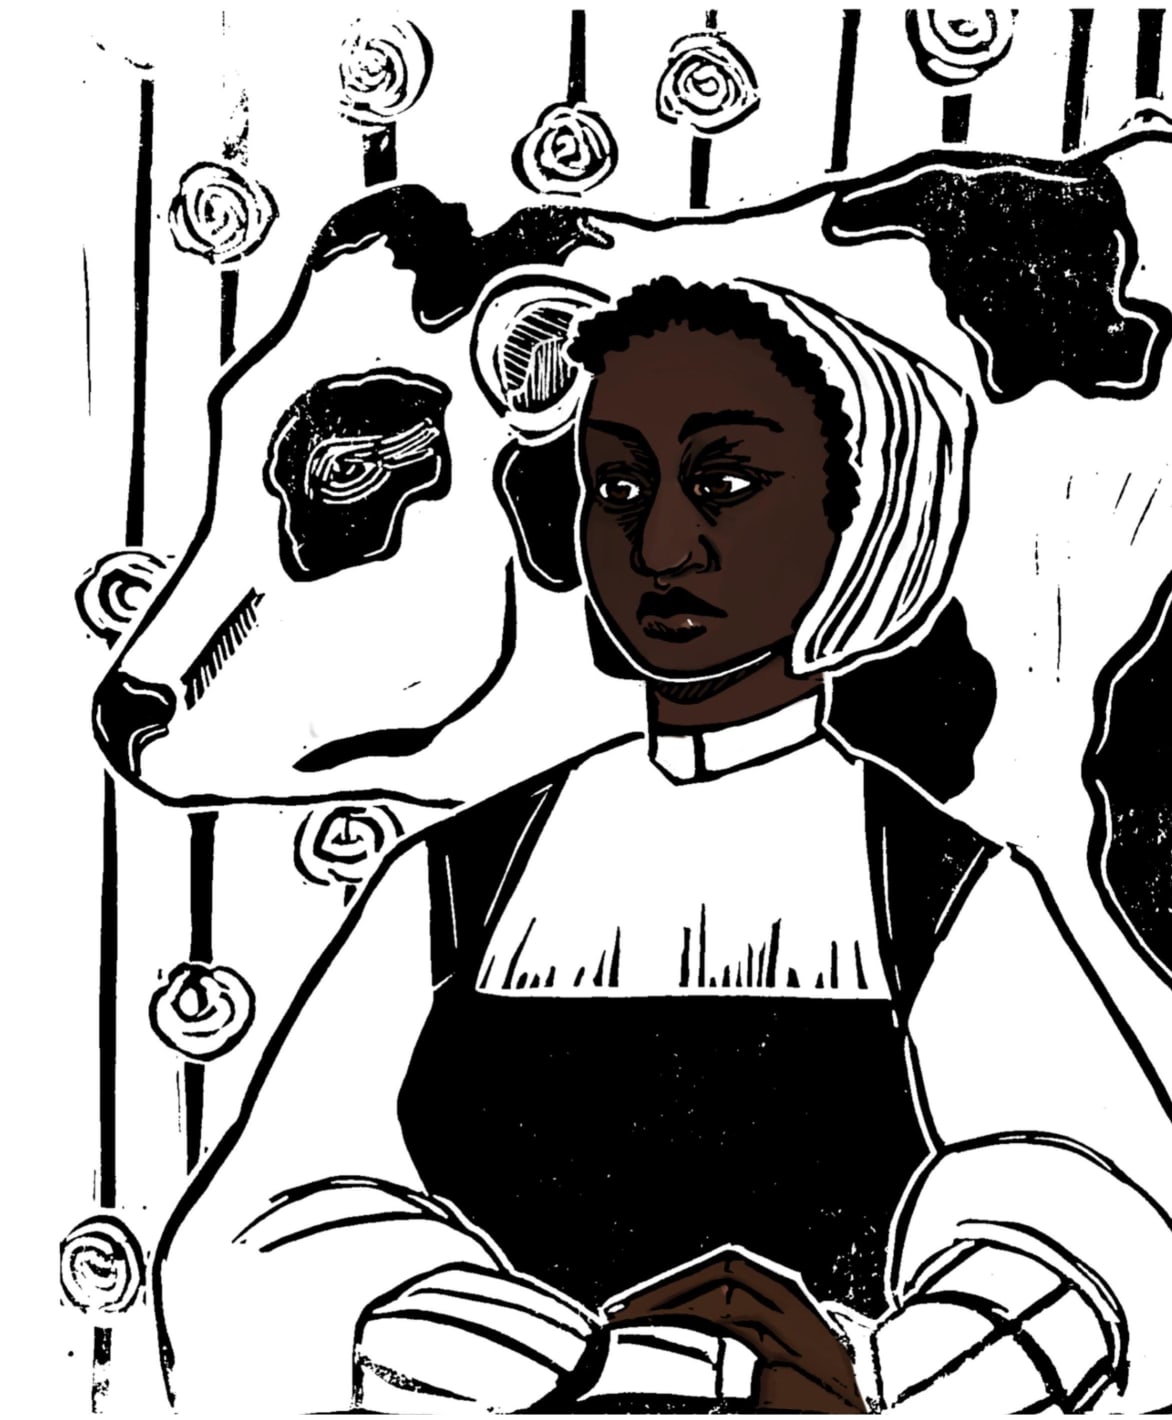 A lino print of a 16th century Black woman dressed in clothes of the time; her white collar tight around her neck and her bonnet covering her hair. Behind the woman is a black and white cow, peering over her shoulder. The wall behind them is wooden, evident from the texture of the wood recreated in print.